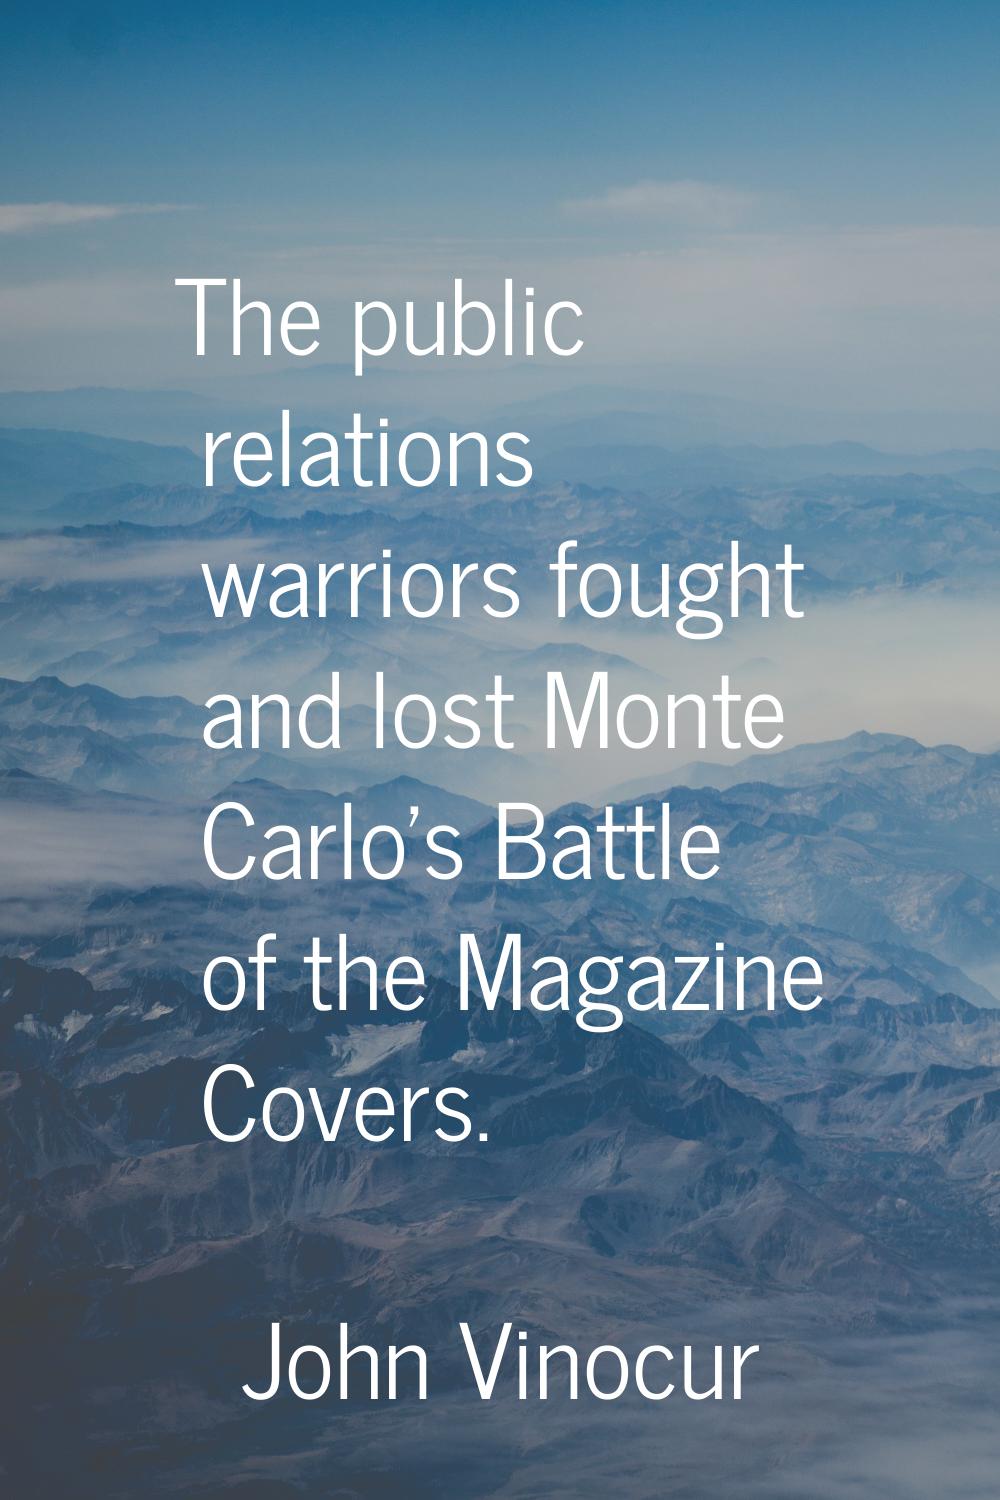 The public relations warriors fought and lost Monte Carlo's Battle of the Magazine Covers.